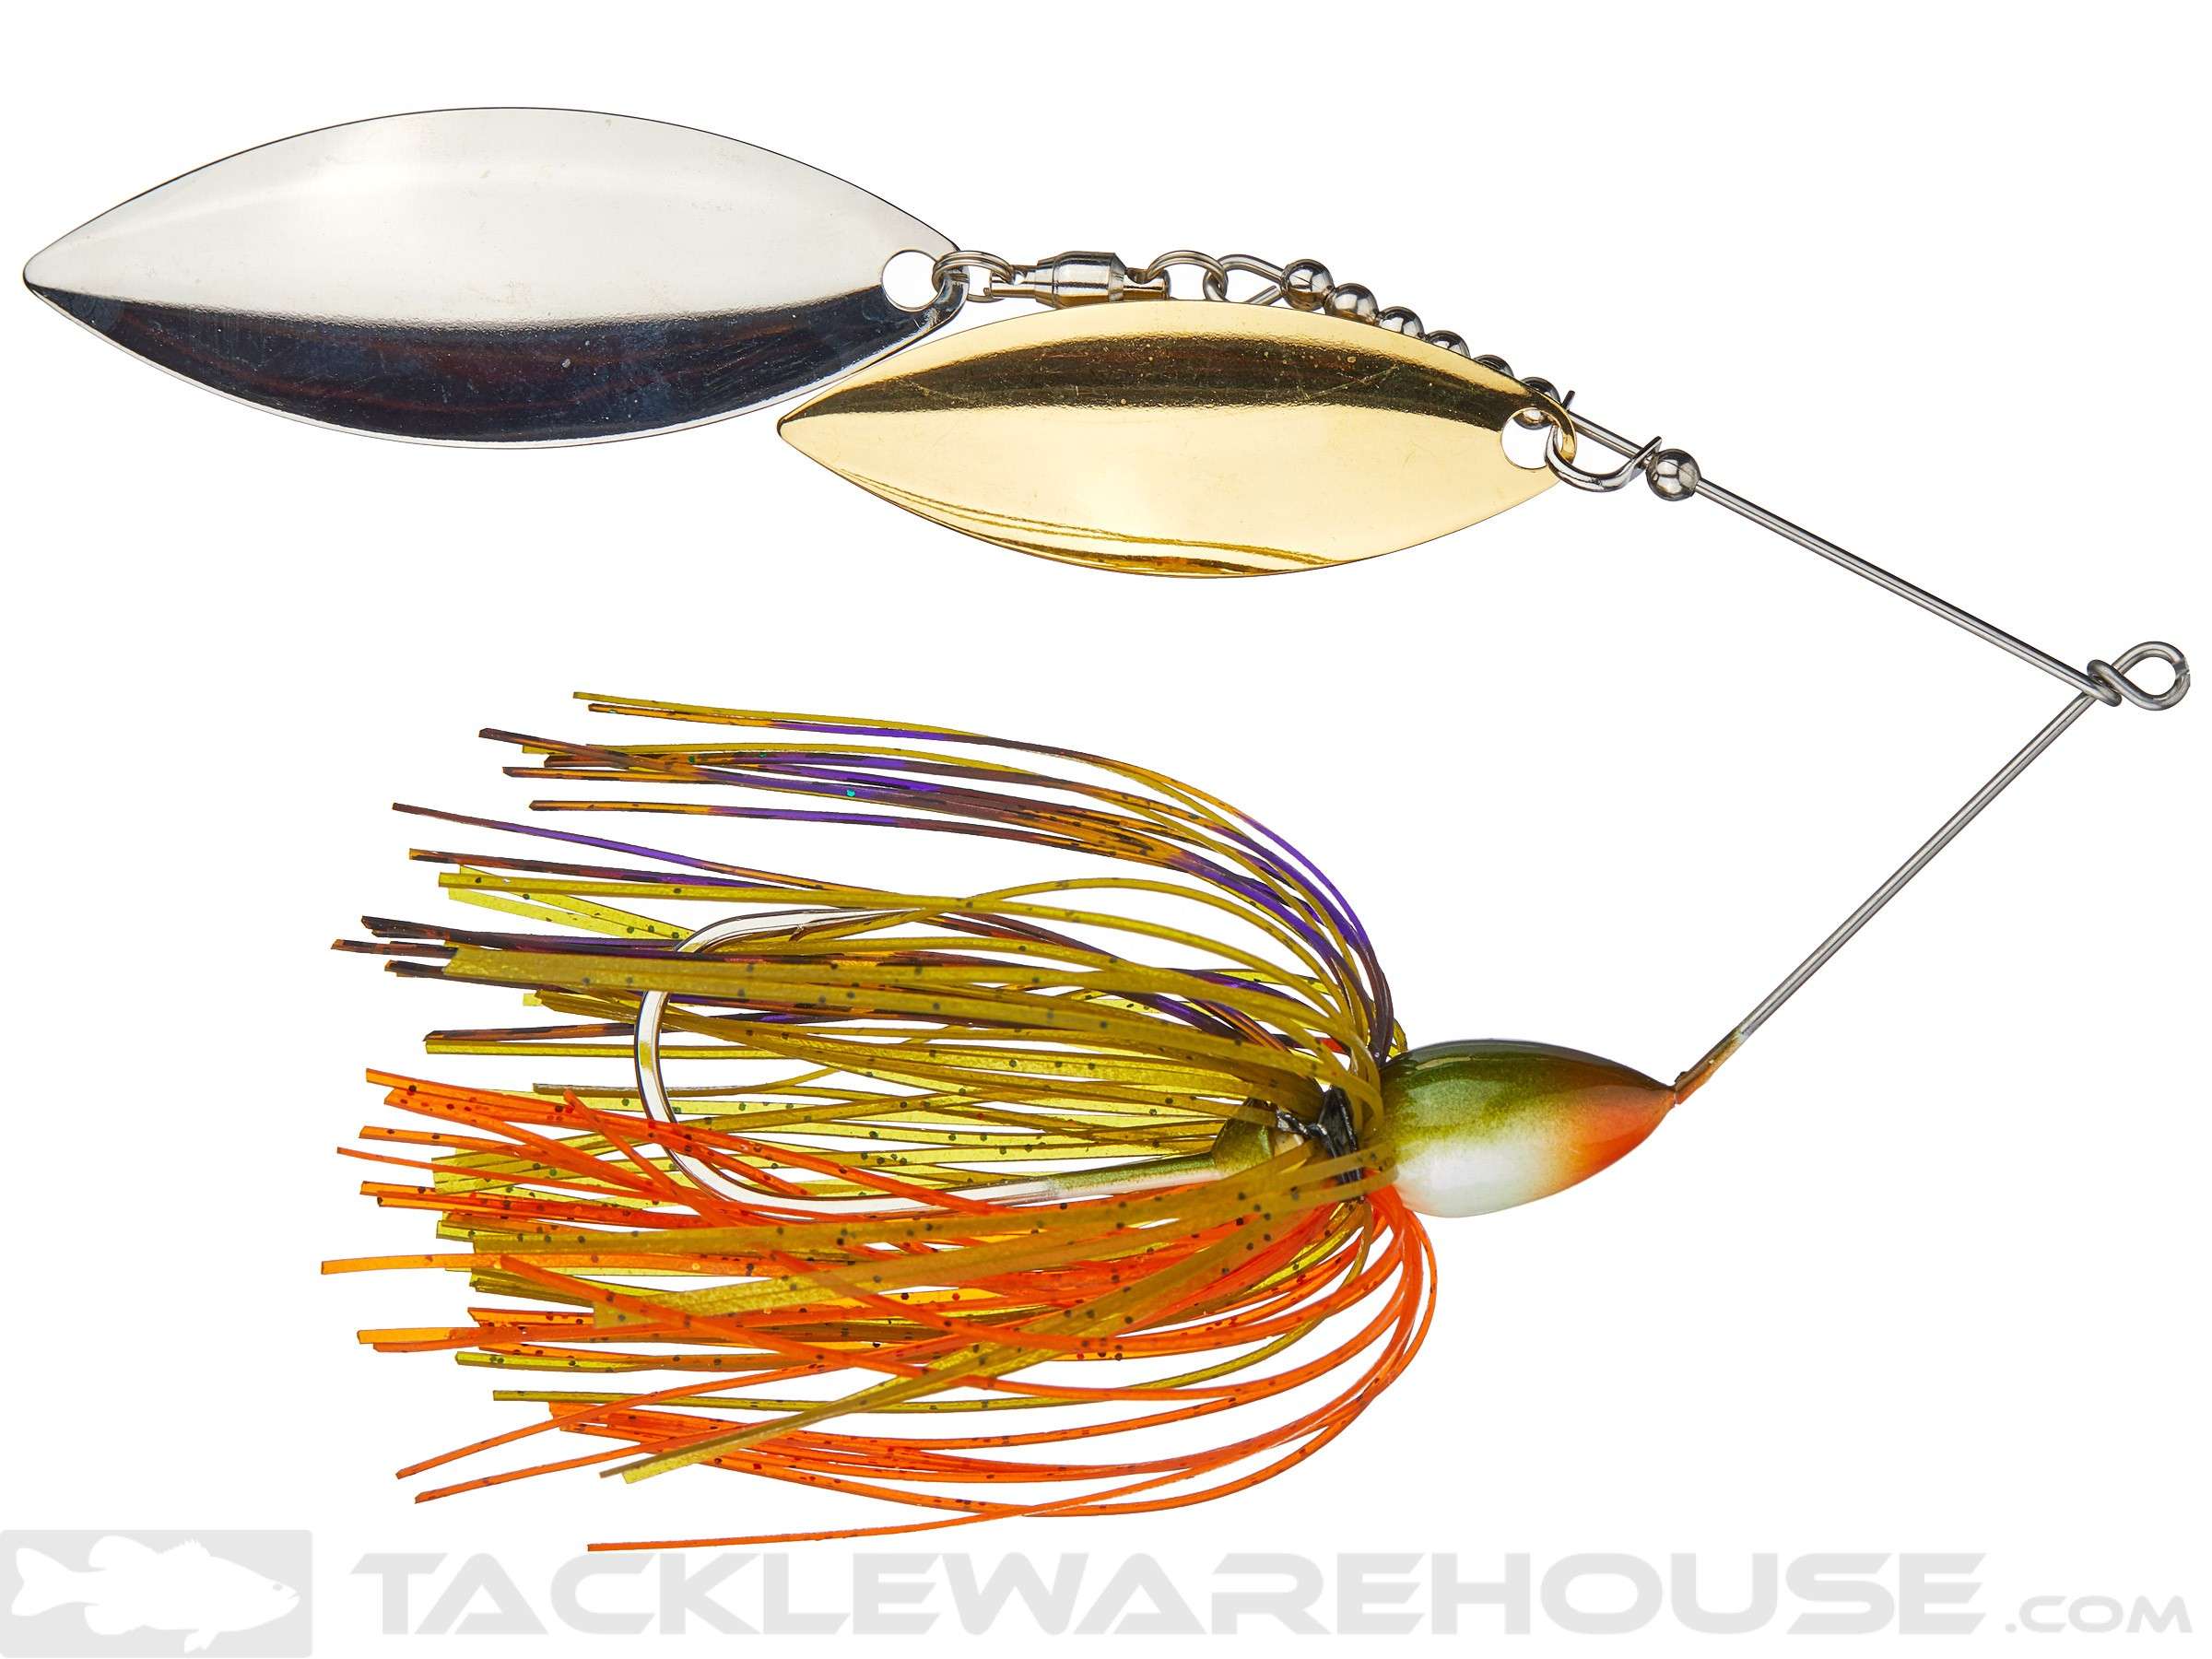 Best Color Skirt Color To Imitate A Bluegill ? - Fishing Tackle